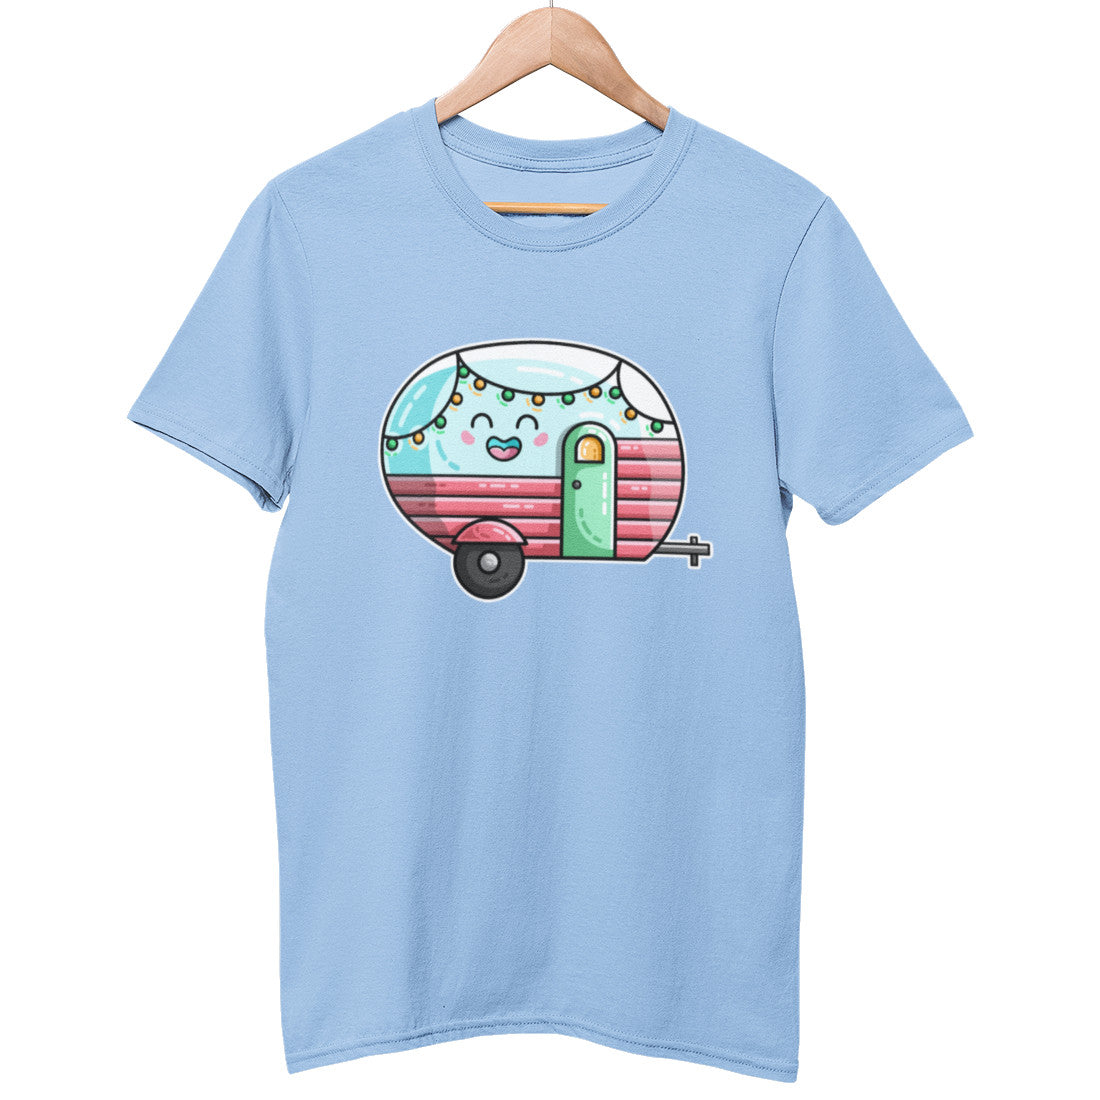 A pale sky blue unisex crewneck t-shirt on a hanger with a design on its chest of a kawaii cute blue vintage style caravan seen side on with the tow bar to the right and with a green door and pink panelling on the bottom half of the caravan and a string of coloured lights looping across the top